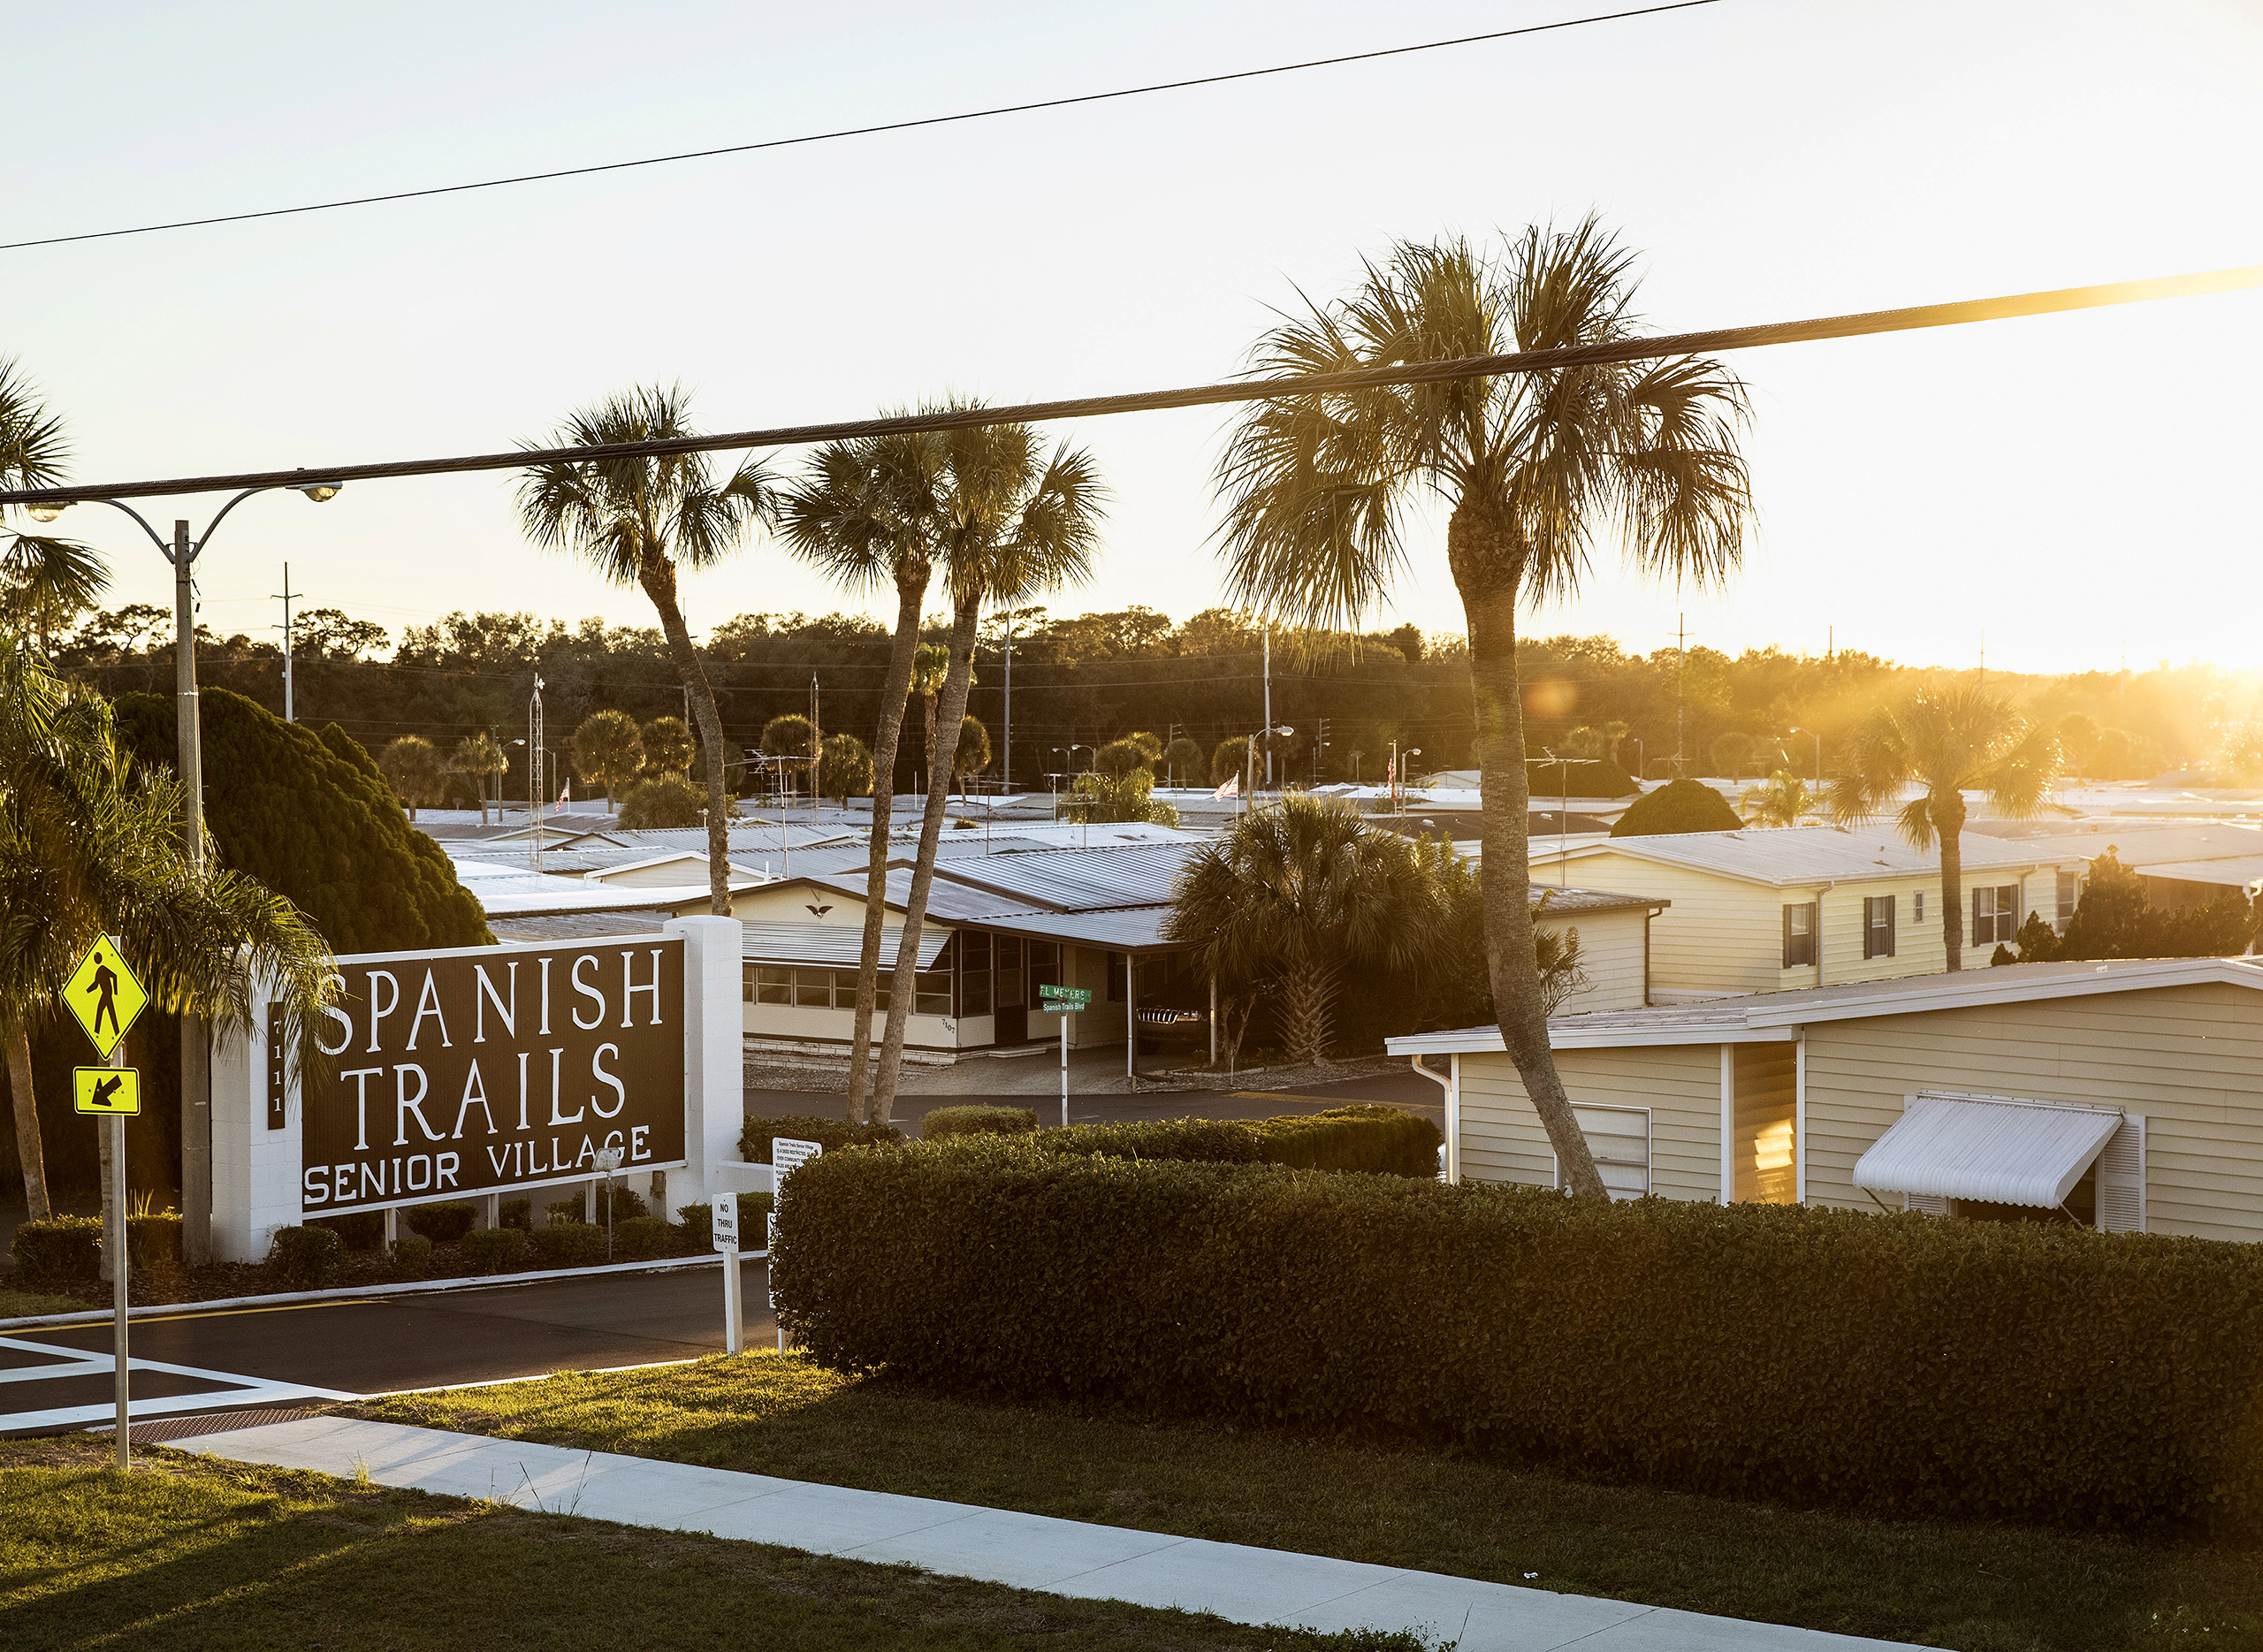 Spanish Trails is among more than 700 Florida trailer parks owned by their residents. (Christopher Morris—VII for TIME)